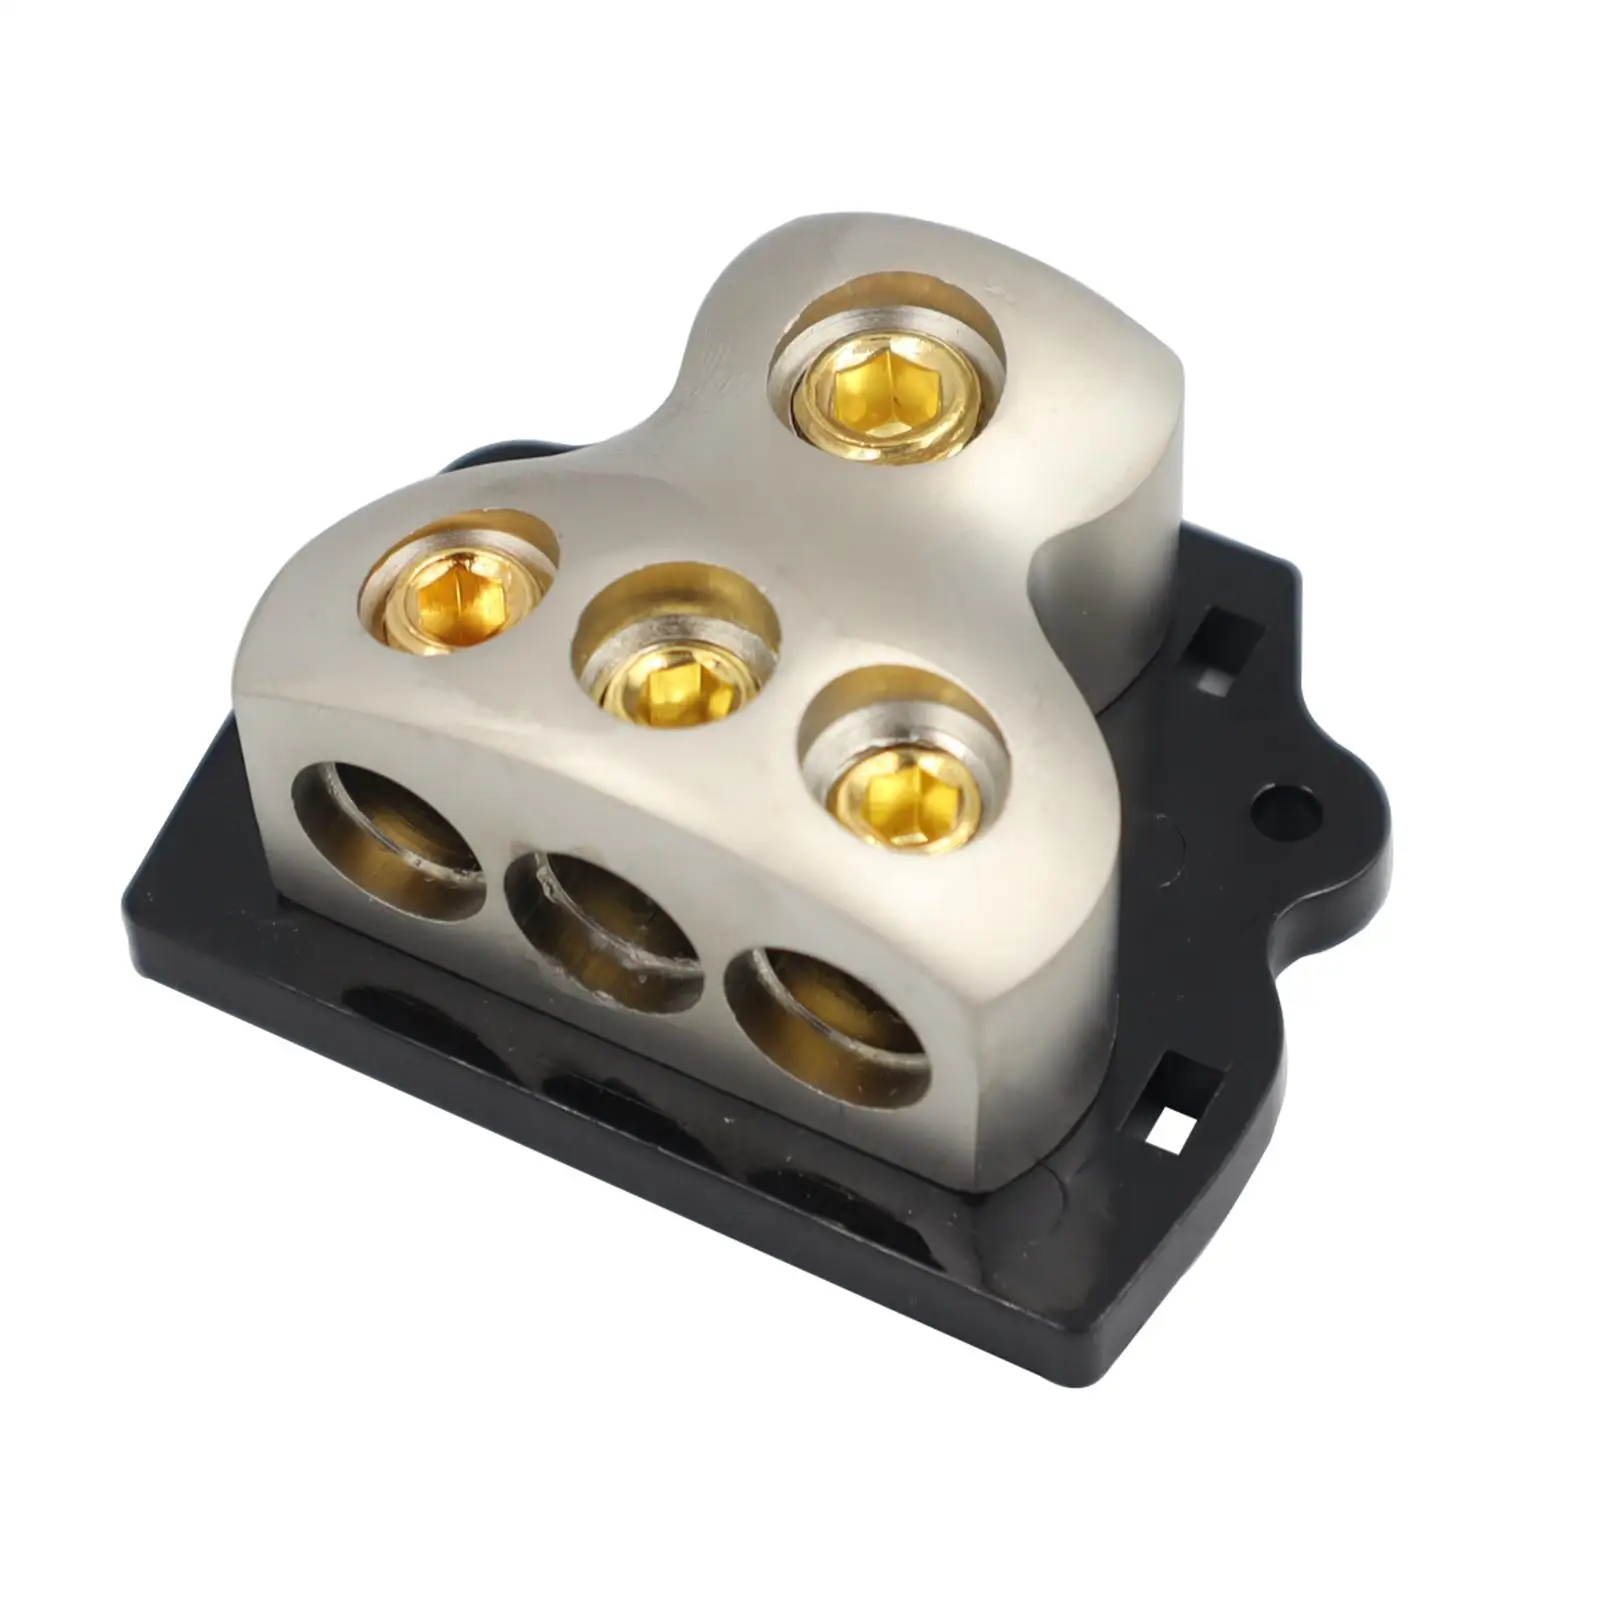 Amp  Distributor Block/ 1x 0  in 3x 4  Out  Car Audio Connection